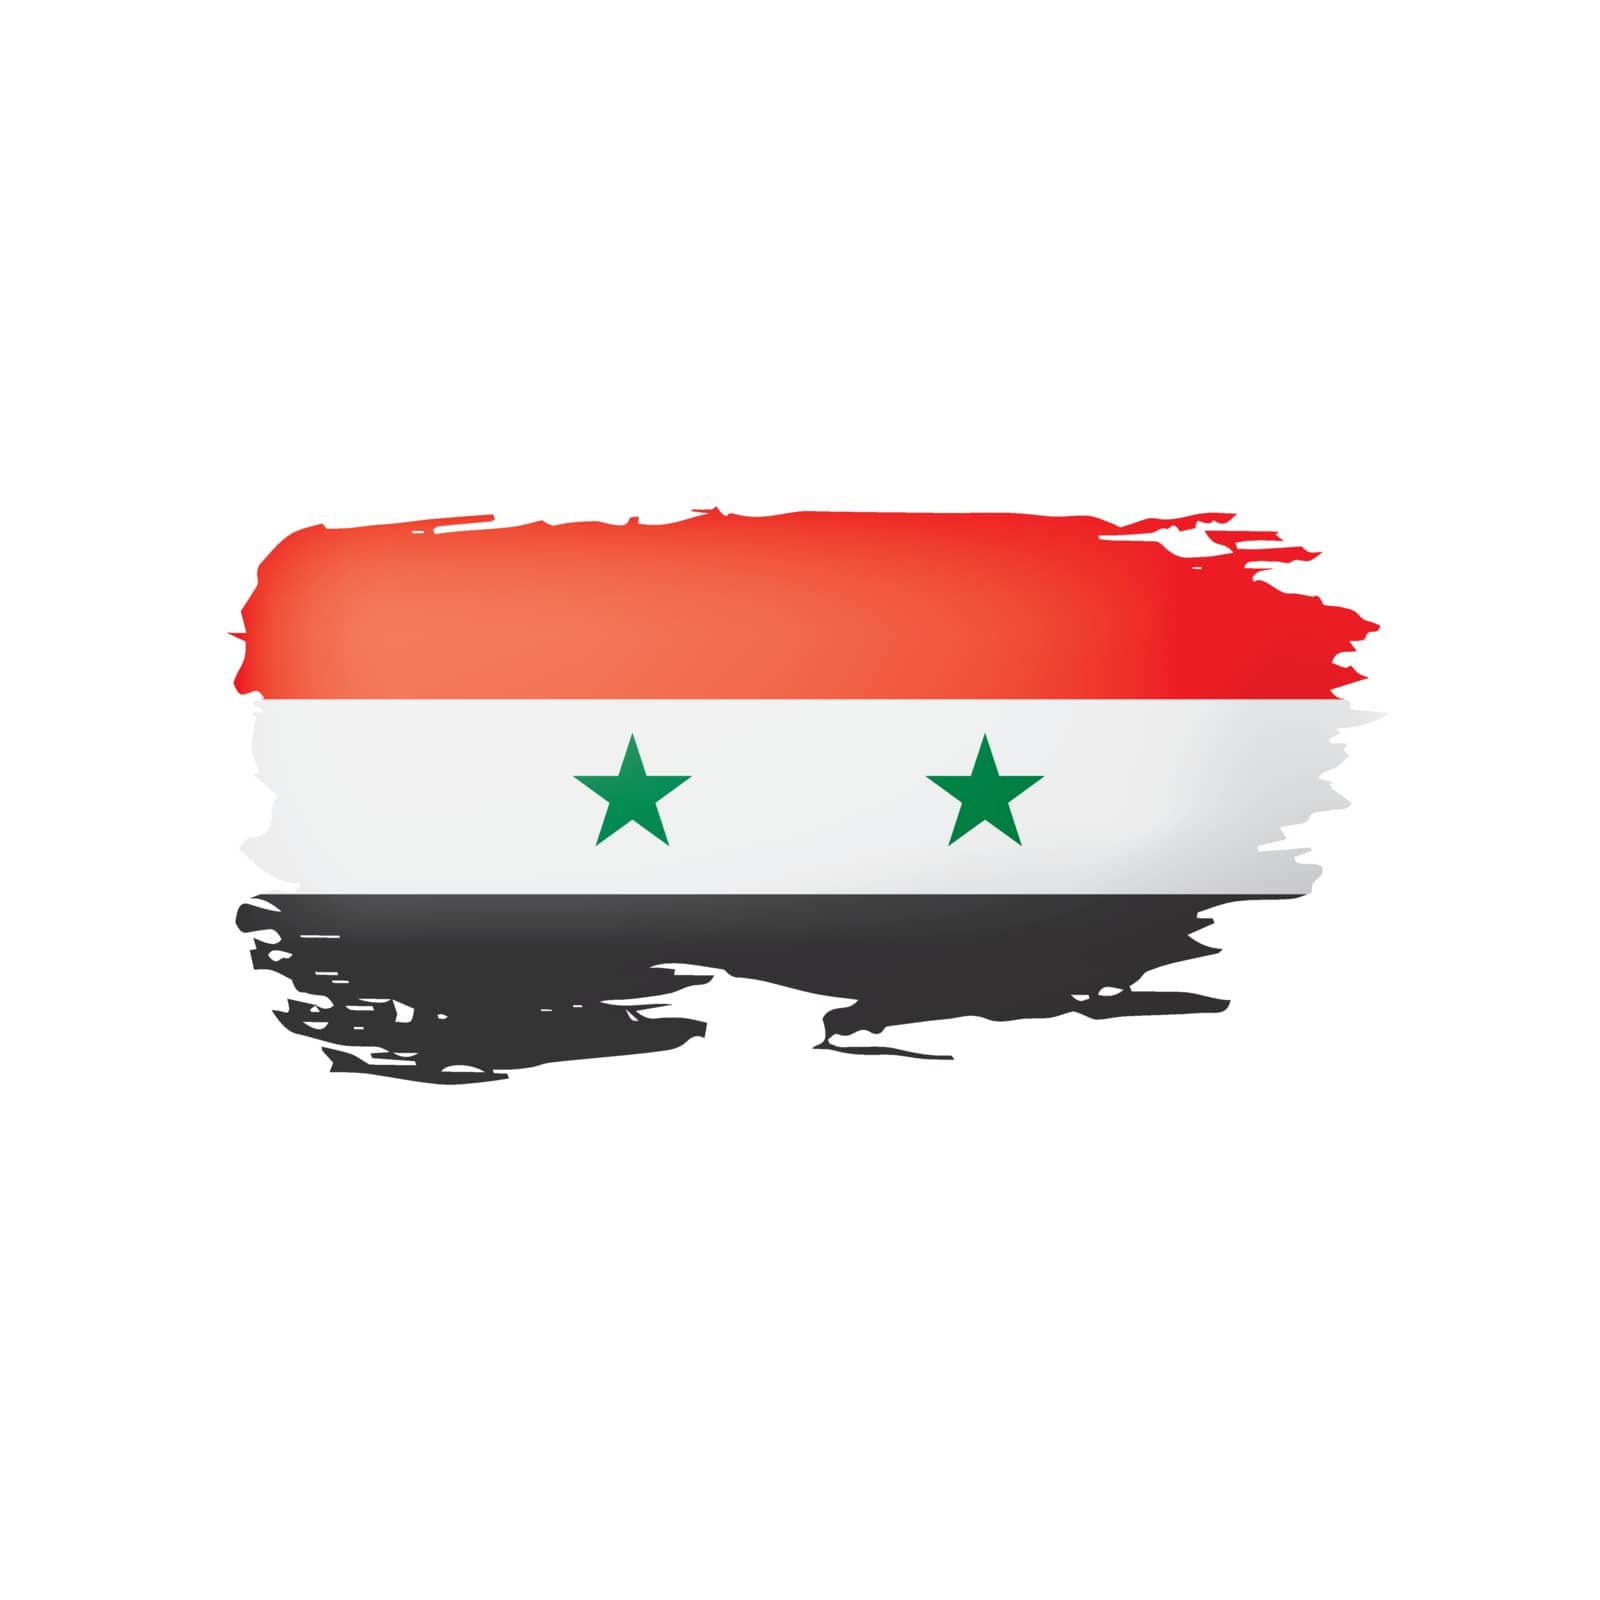 Syria flag, vector illustration on a white background. by butenkow